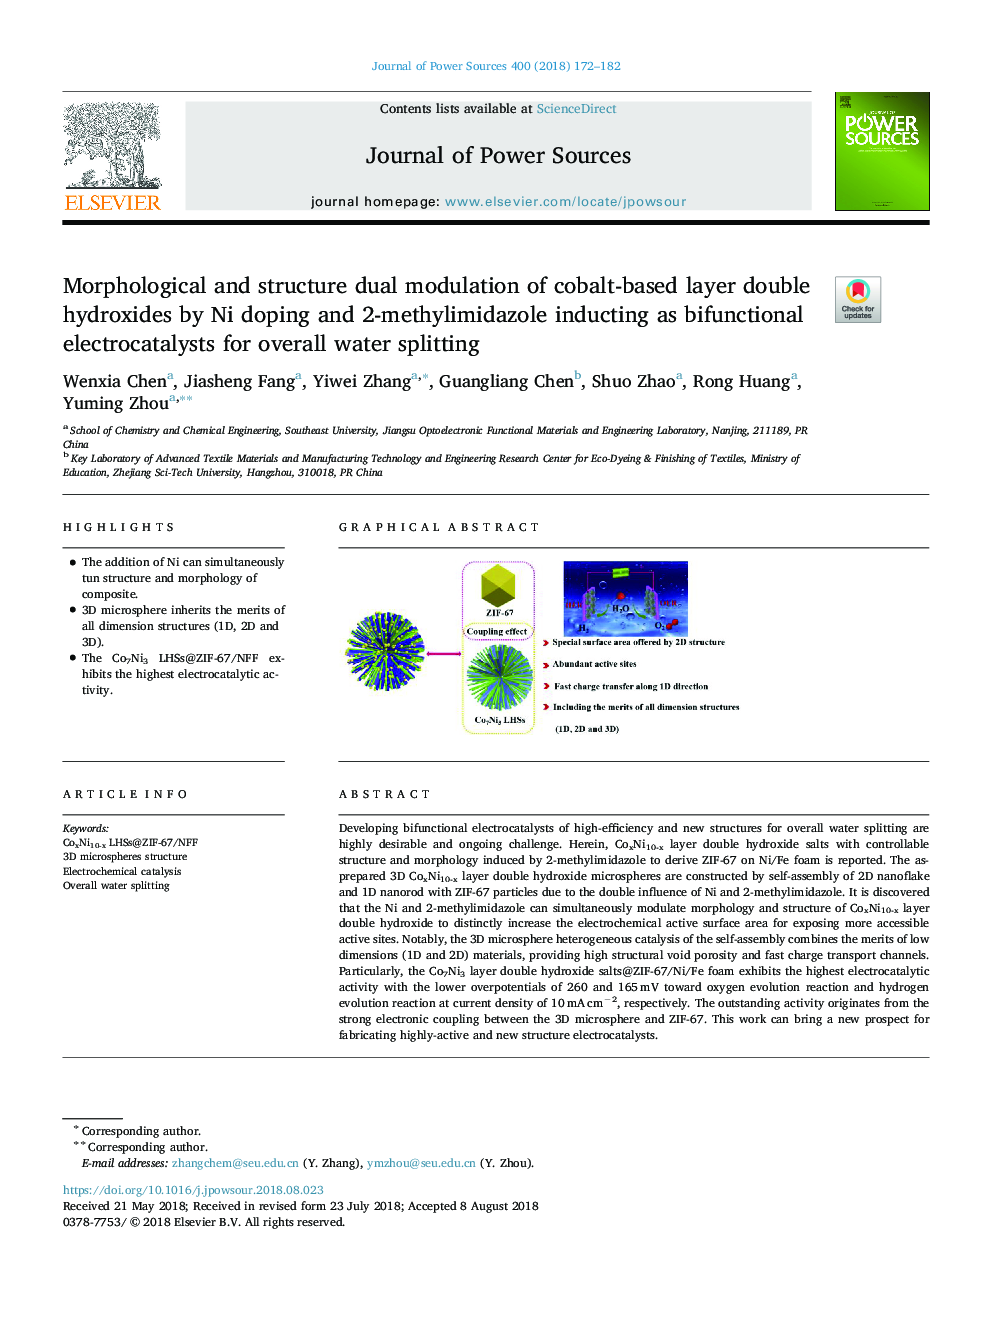 Morphological and structure dual modulation of cobalt-based layer double hydroxides by Ni doping and 2-methylimidazole inducting as bifunctional electrocatalysts for overall water splitting